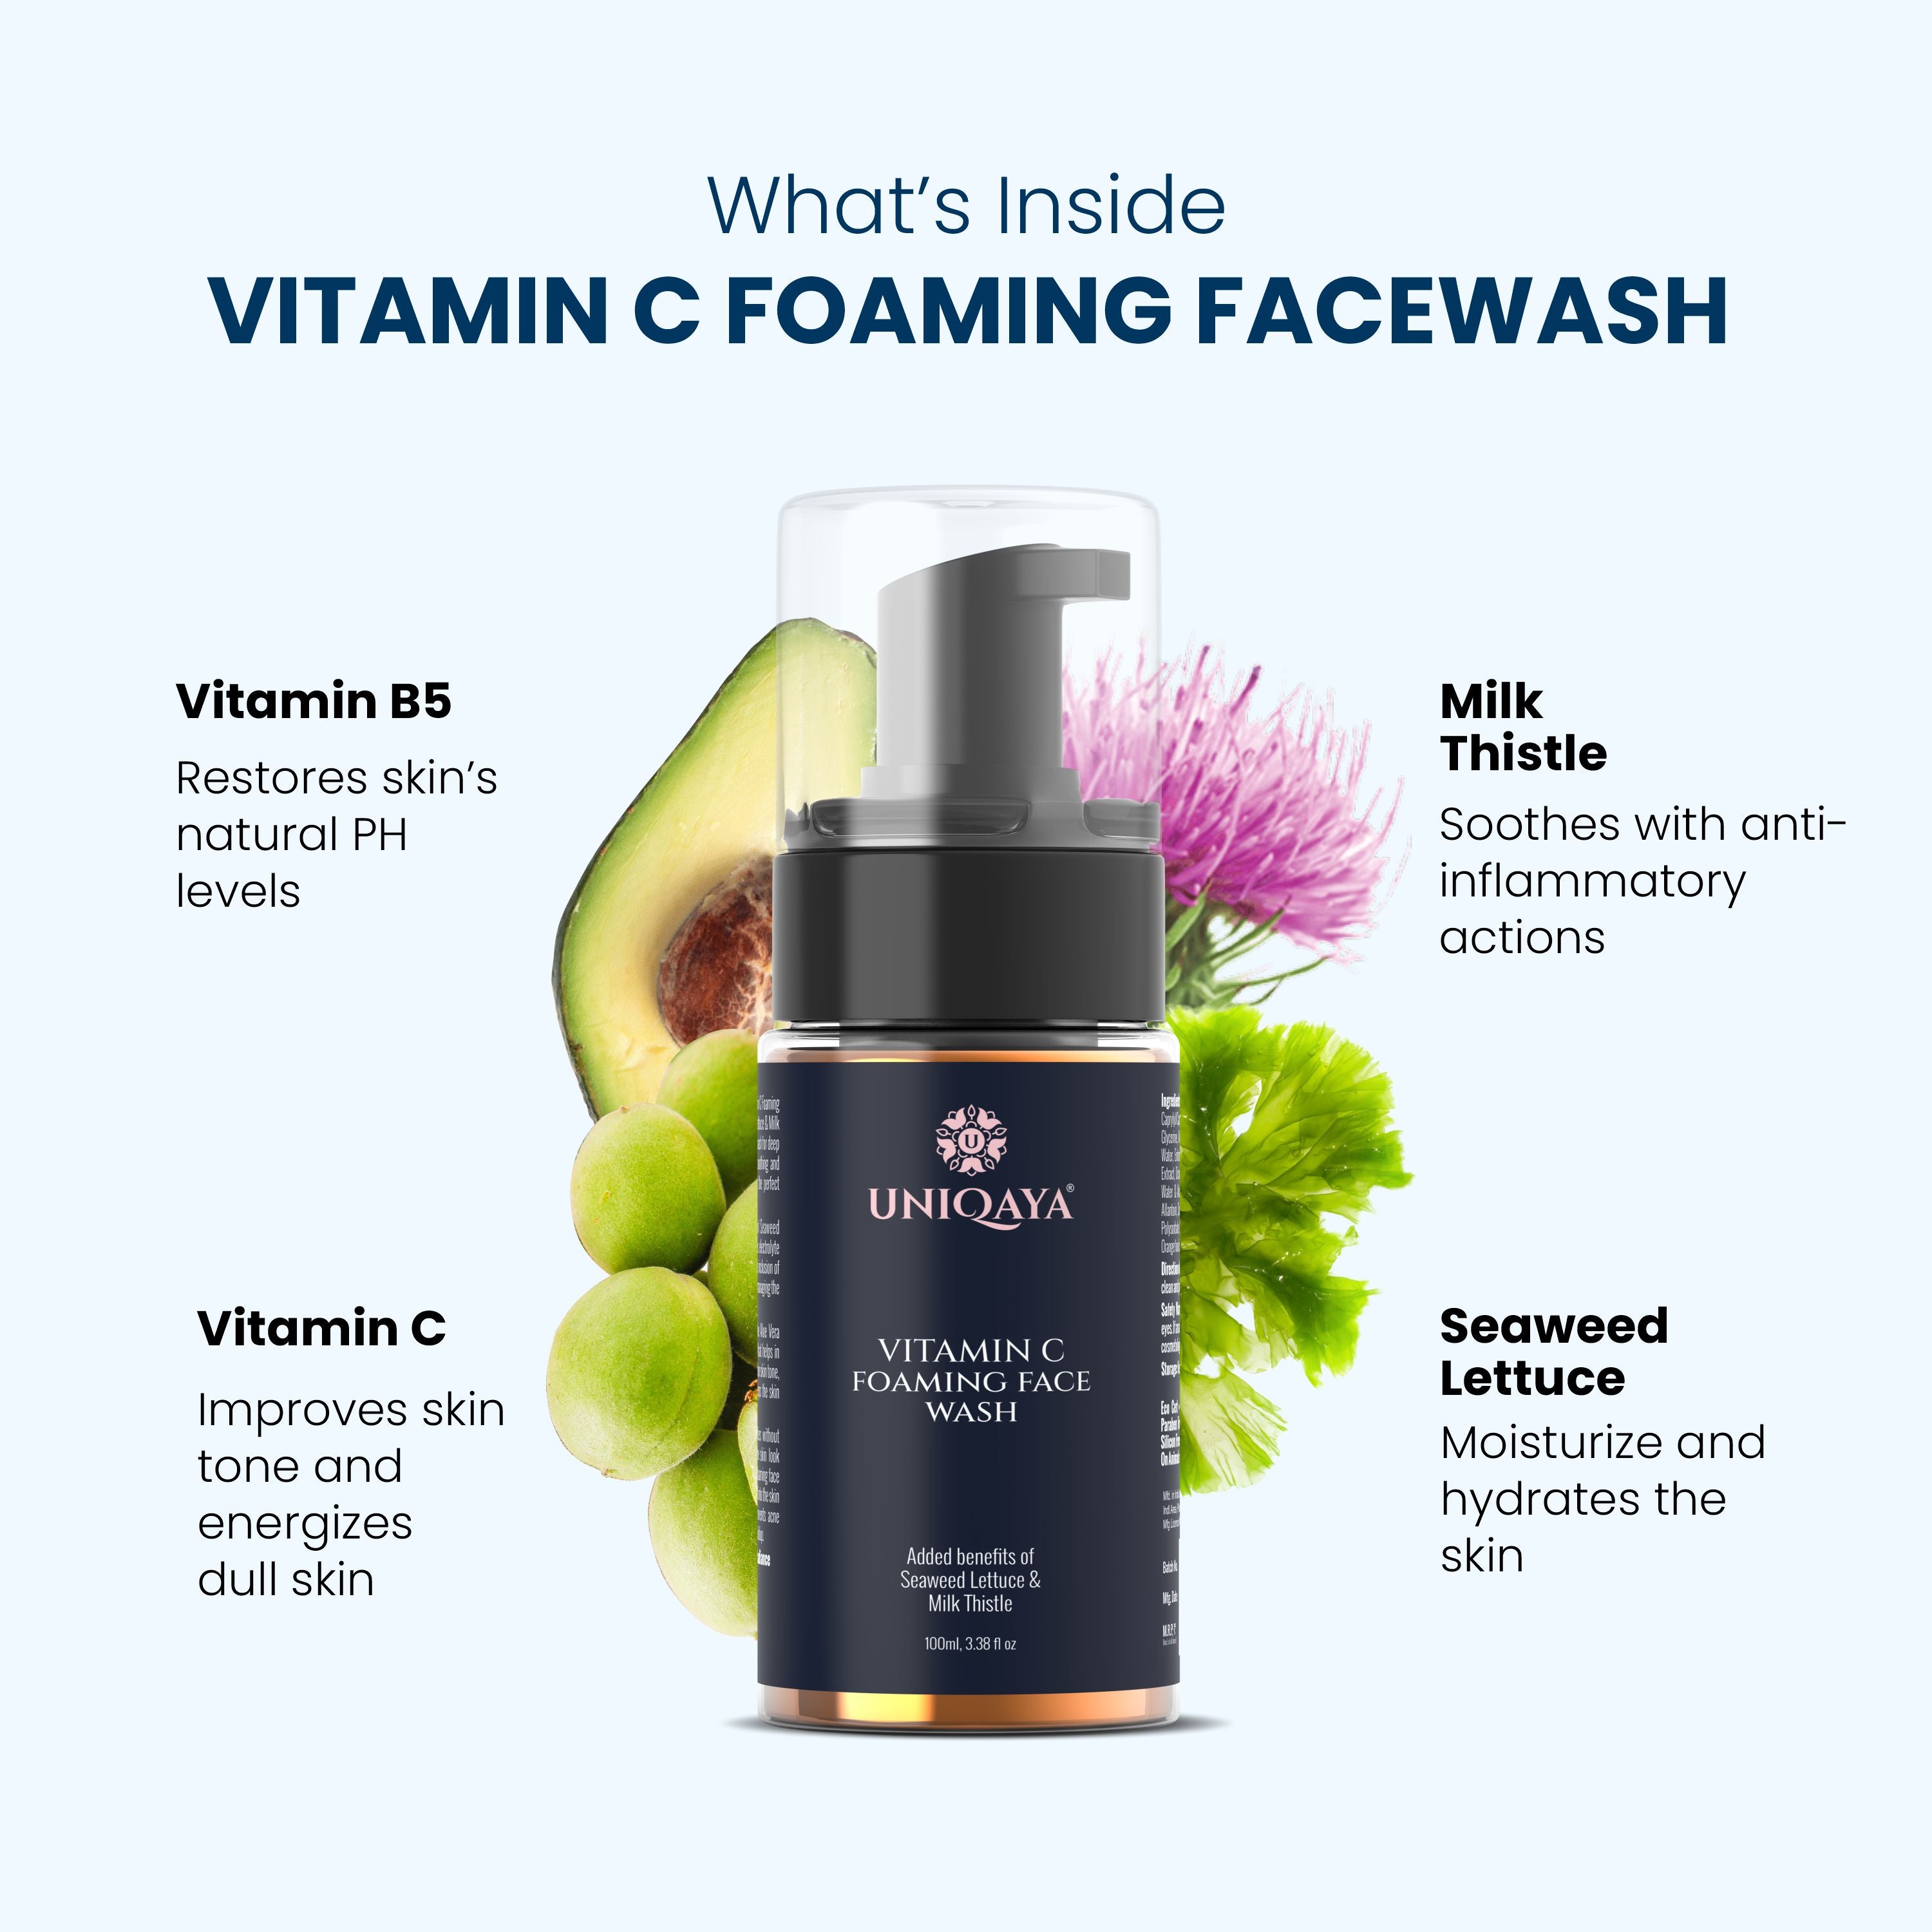 What's Inside Face Wash?